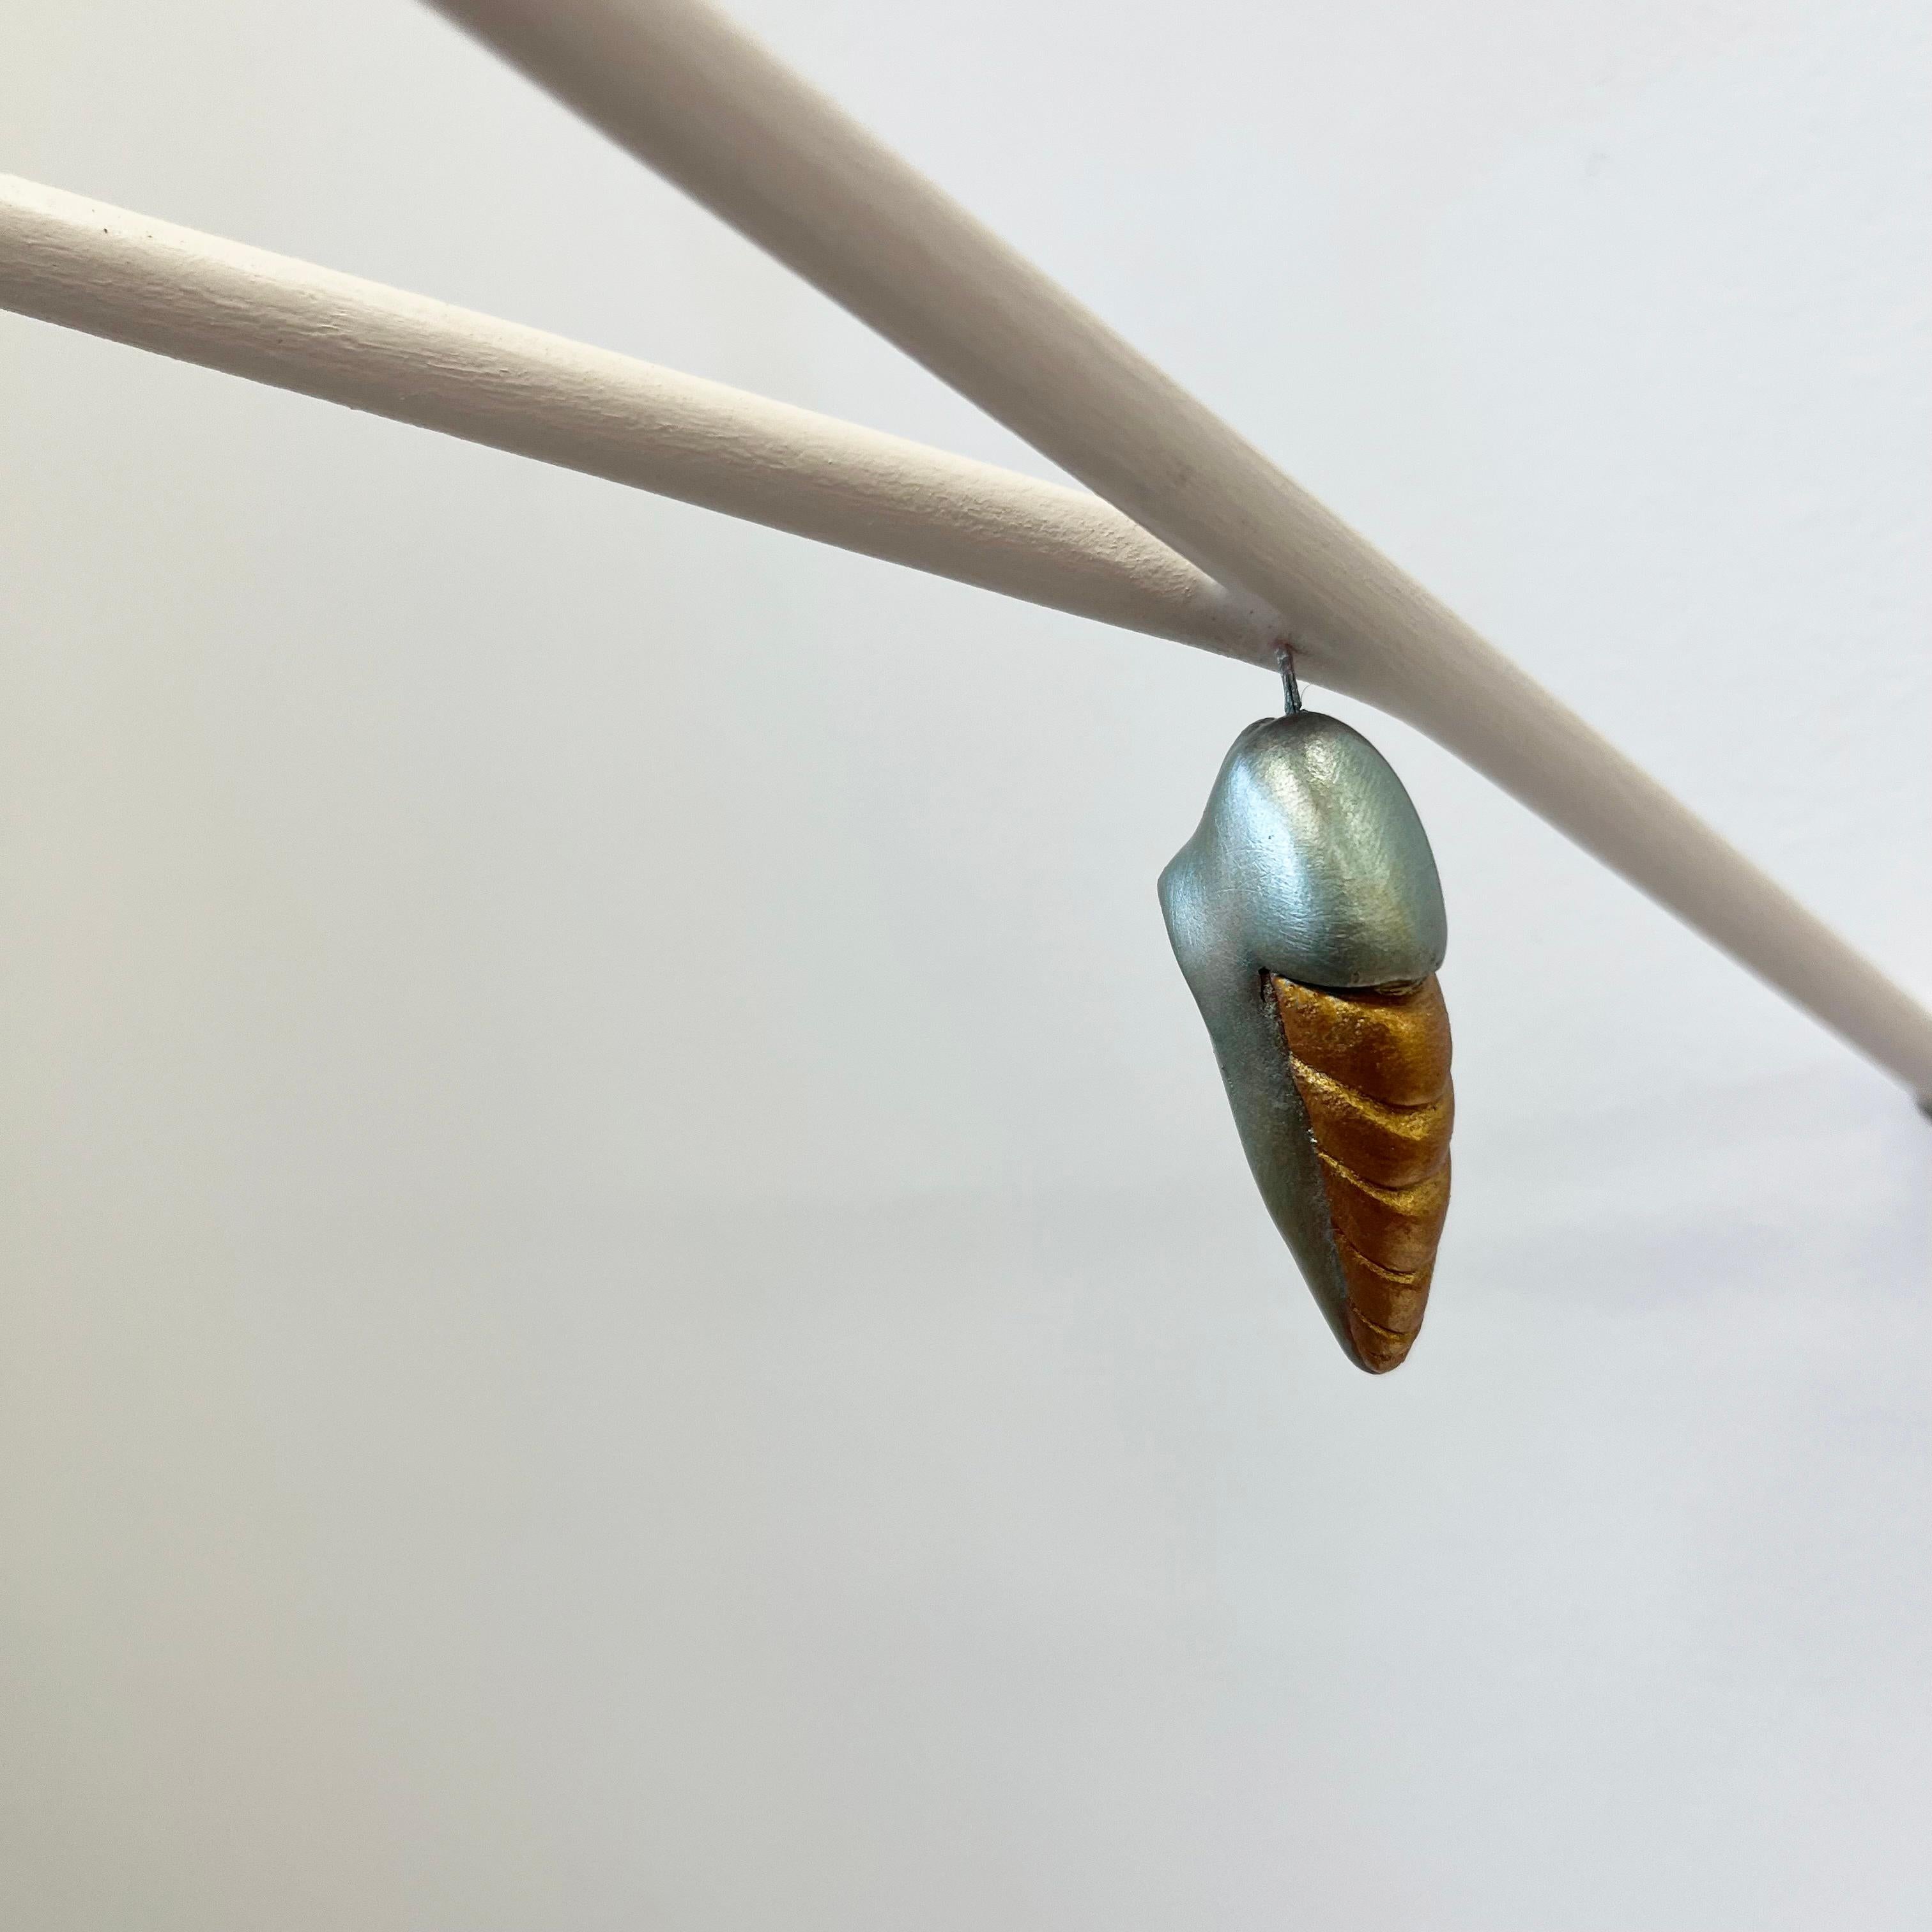 Chrysalis on a minimalist Branch (one) - Contemporary Mixed Media Art by Bethany Krull